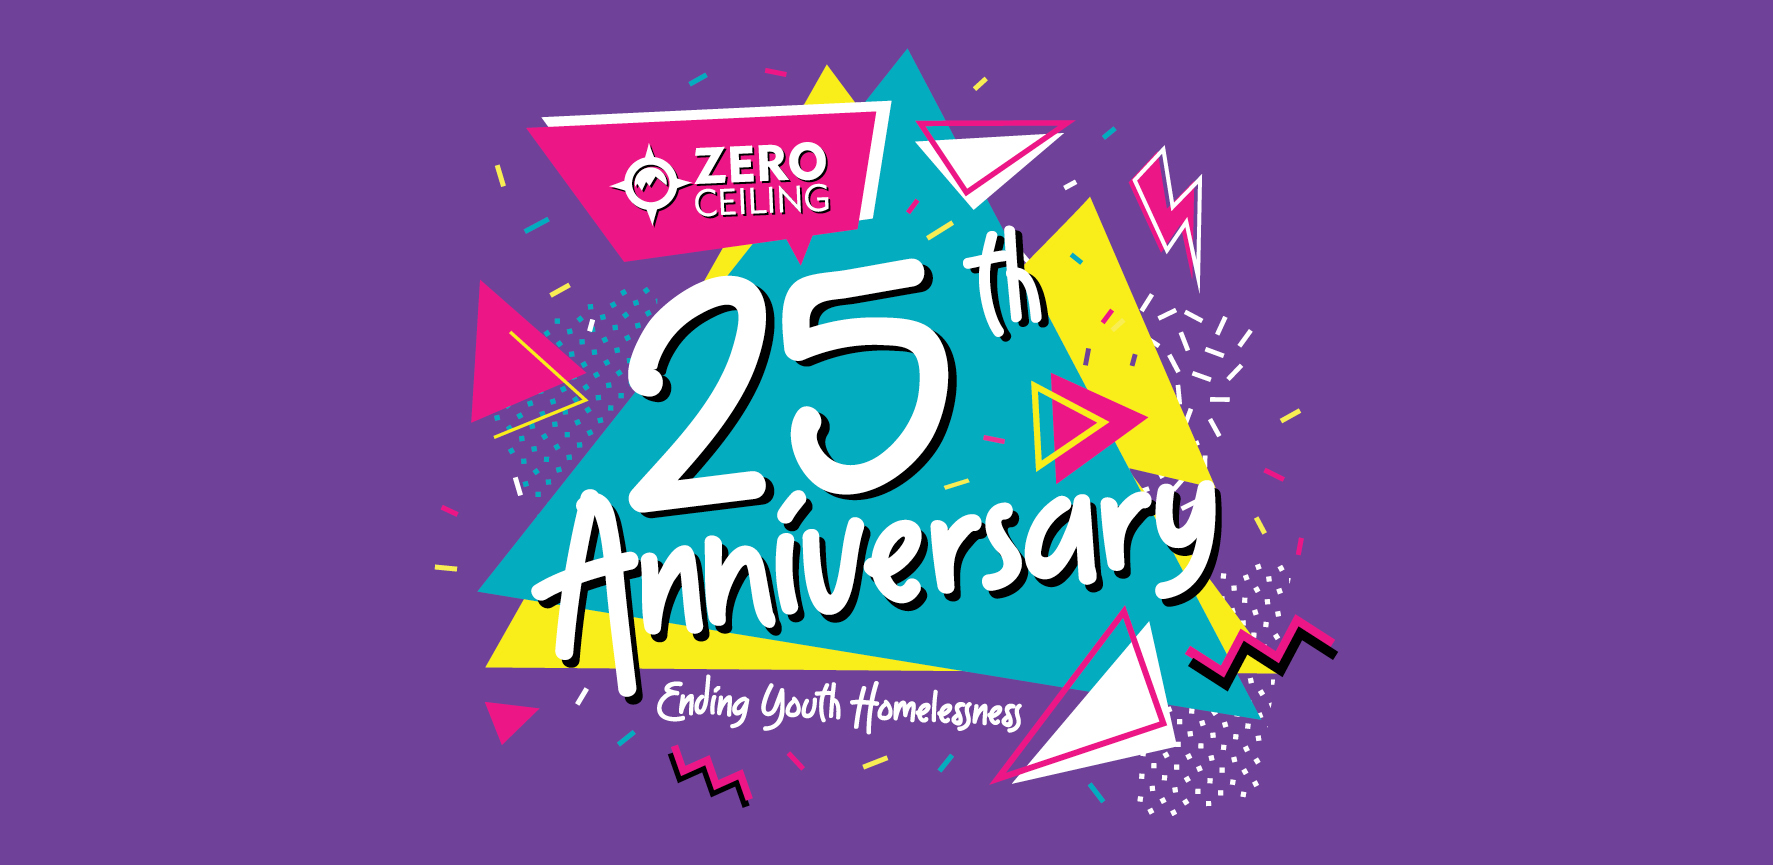 Fundraiser by Campaigns Team : Please donate £25 towards our 25th